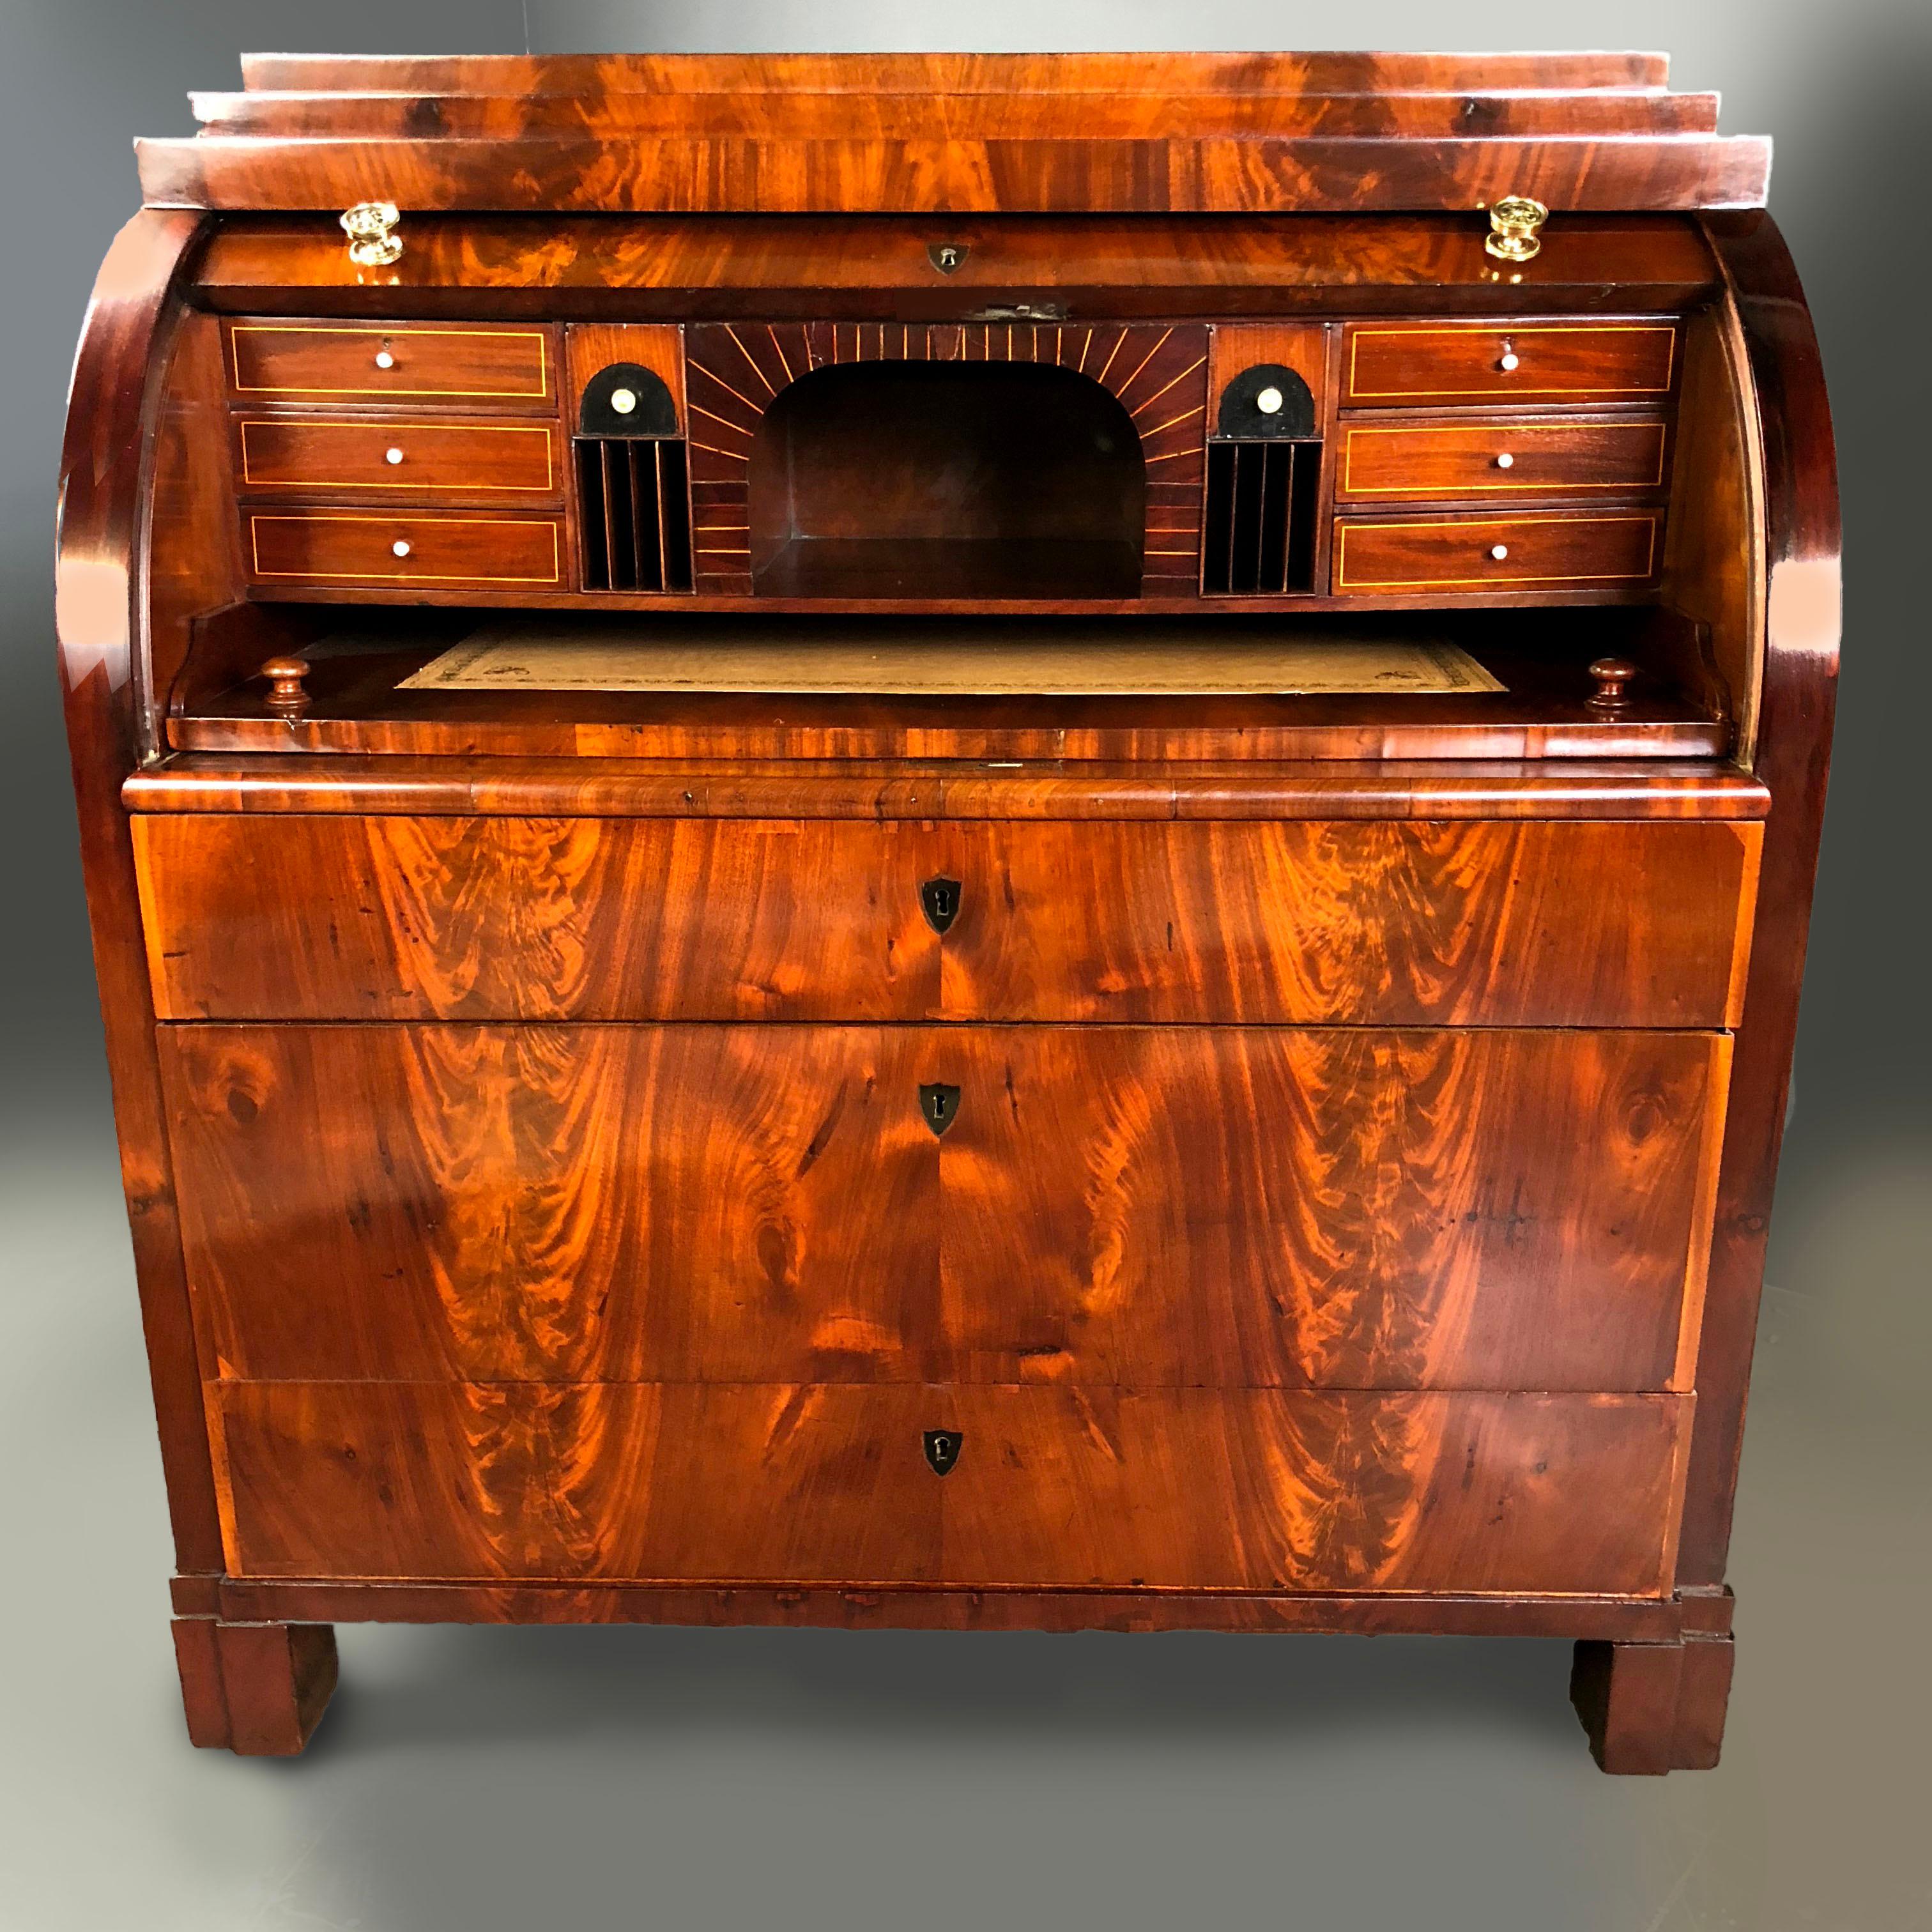 Early 19th century Biedermeier period Bureau of Danish origin of finely figured mahogany veneers, with a cylinder top that once open, it reveals a series of small drawers and hidden compartments, around a central open compartment. There is a writing